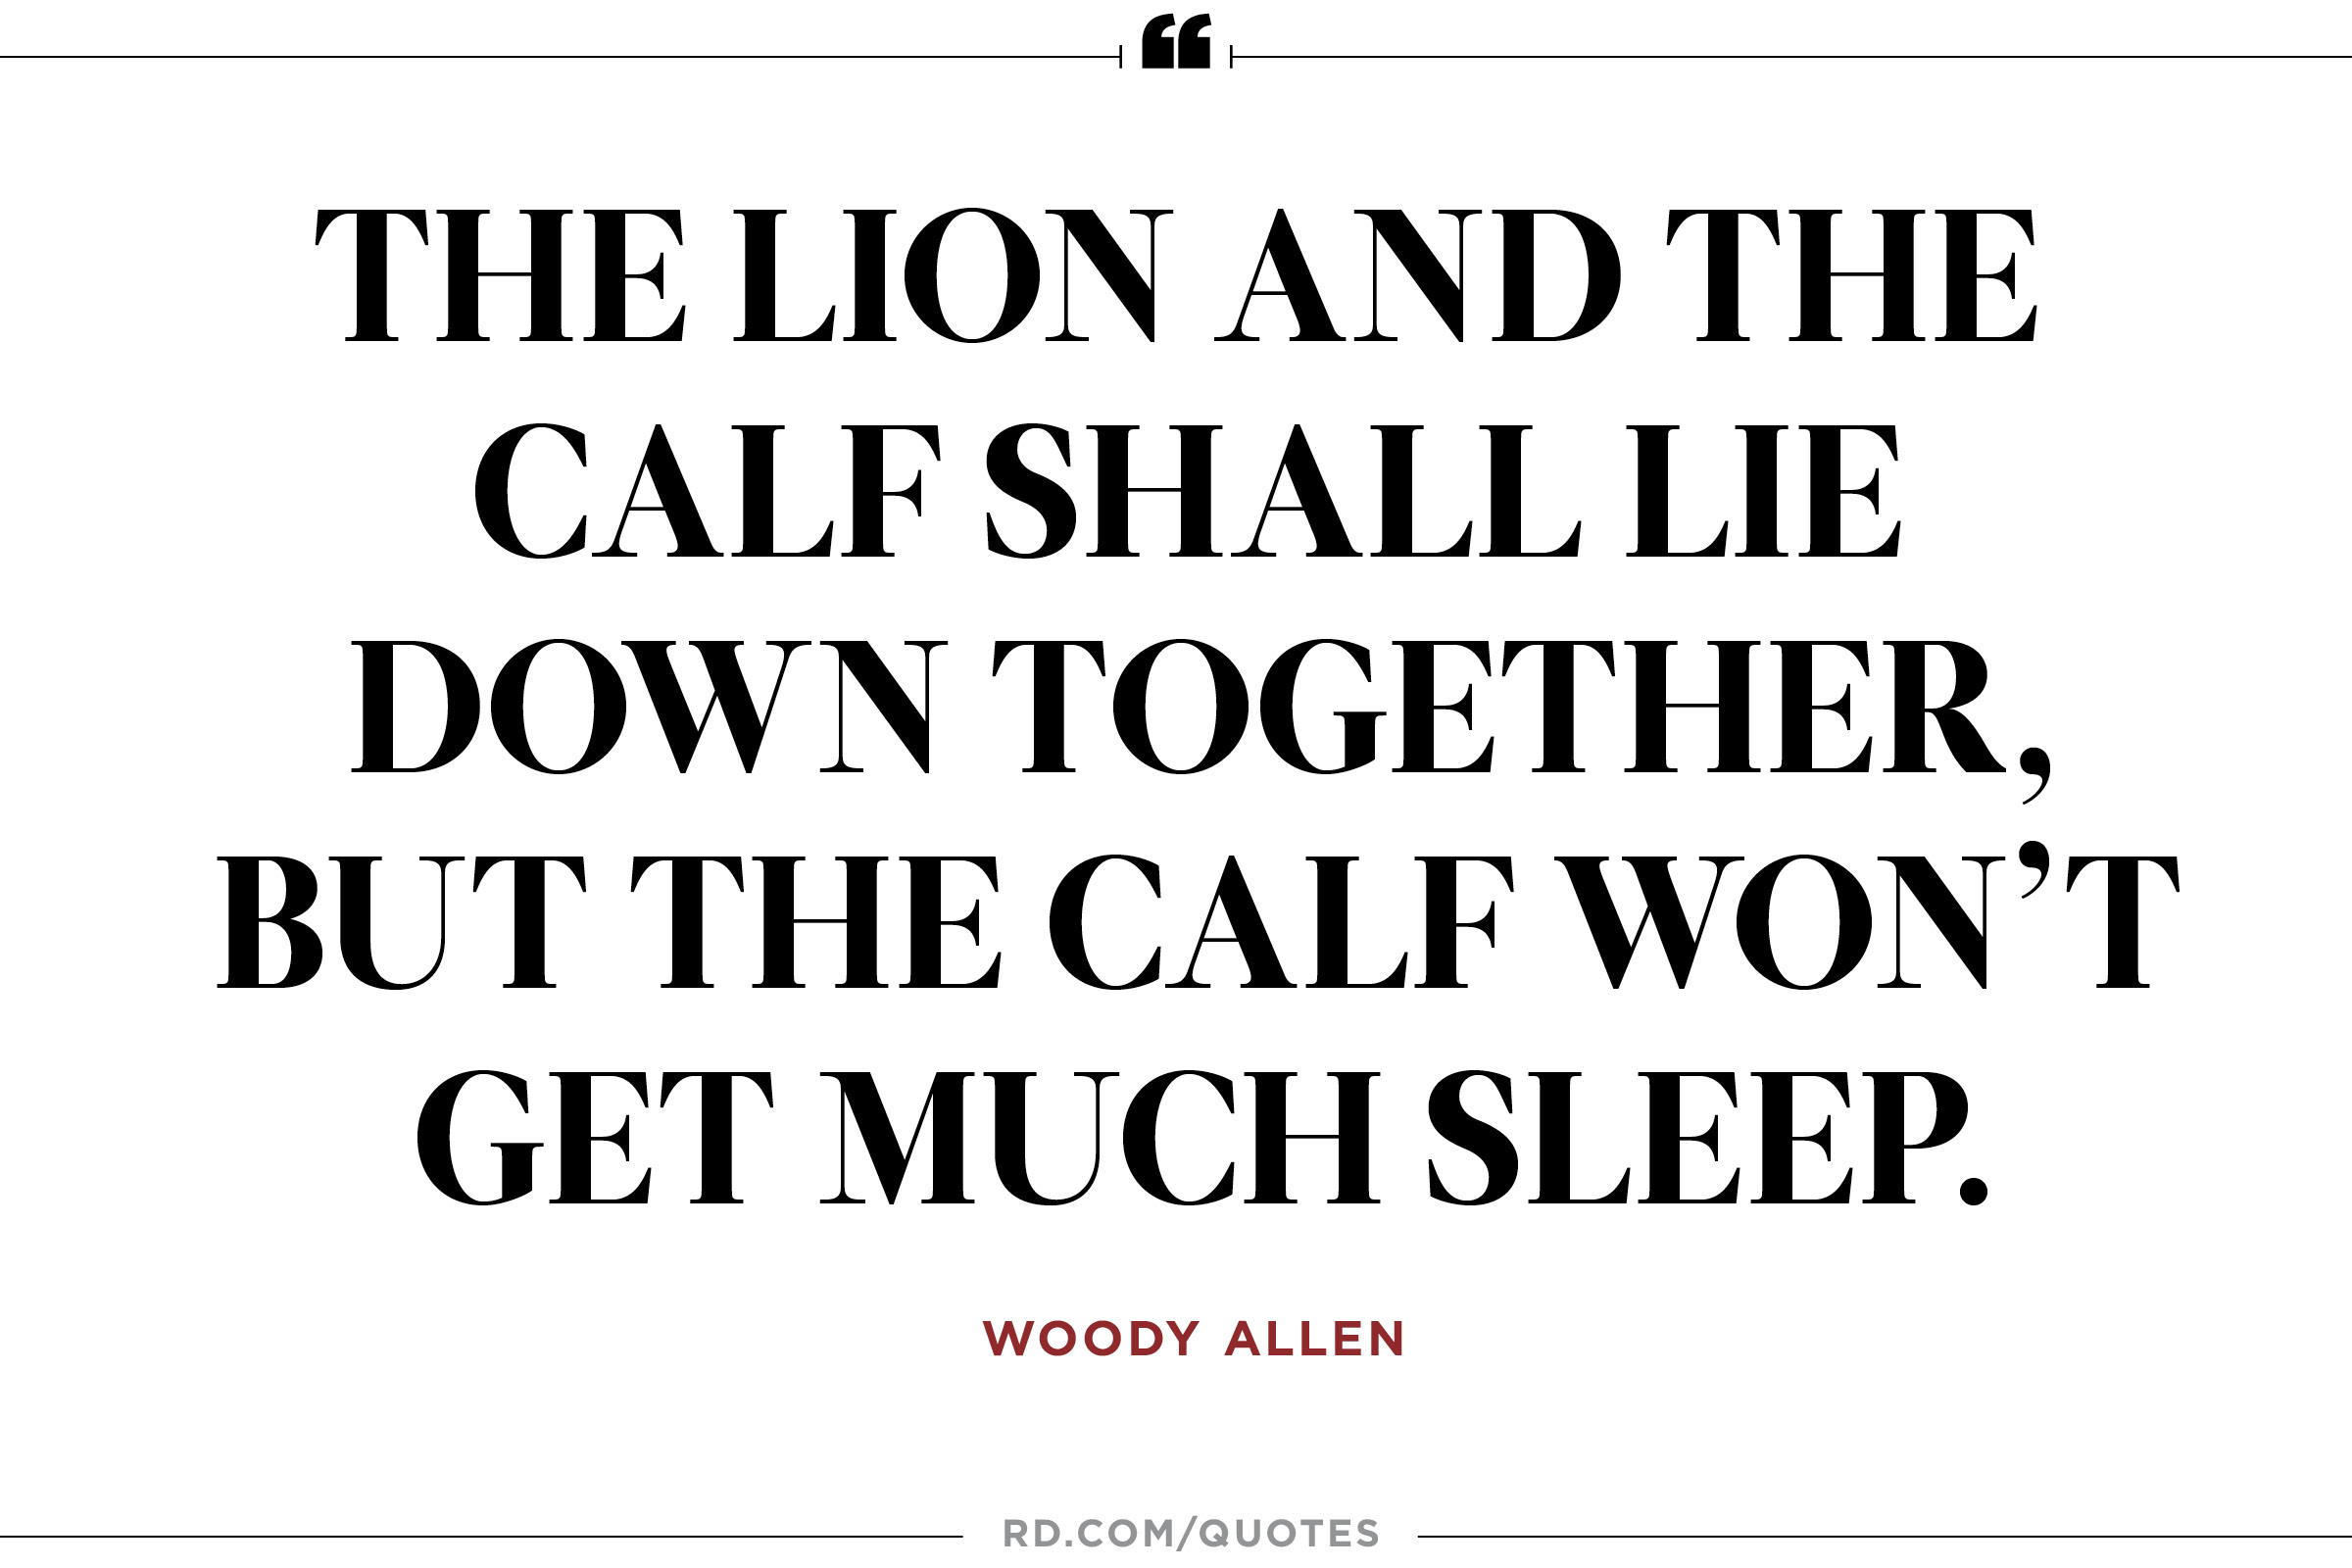 The lion and the calf shall lie down together but the calf won't get much sleep. Woody Allen